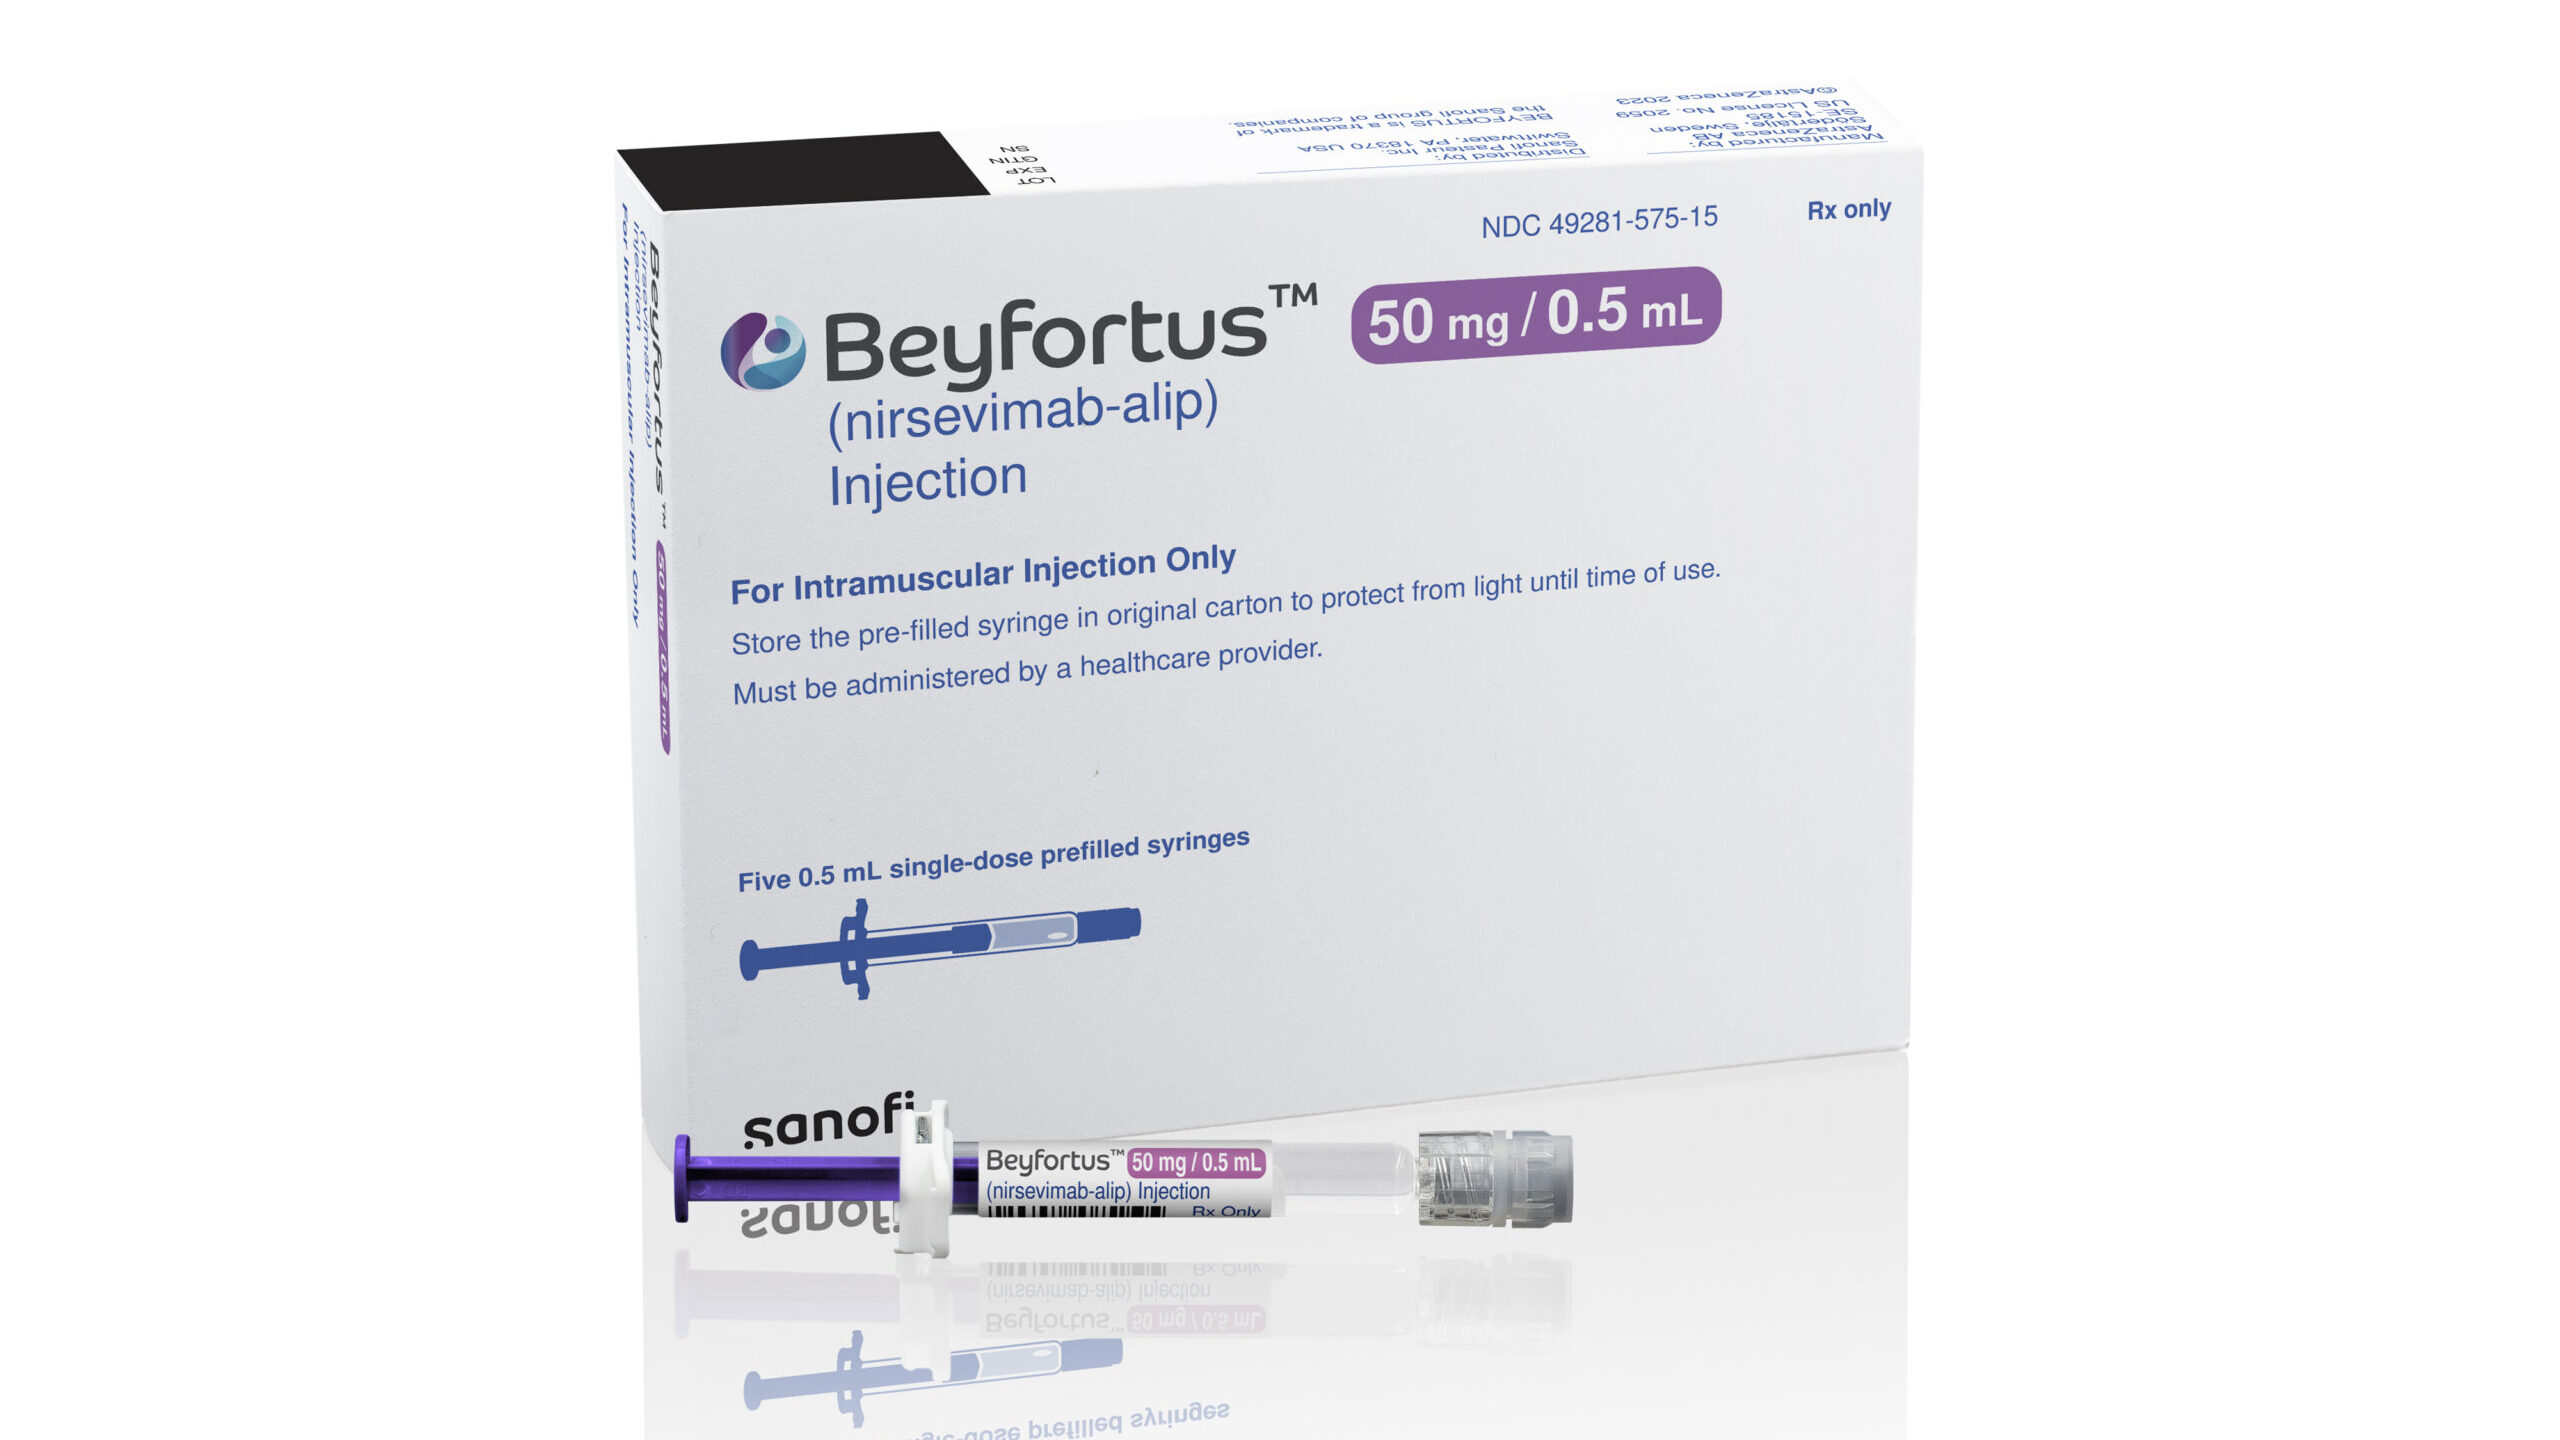 Beyfortus packaging is pictured. The FDA has approved an RSV prevention tool that could help preven...